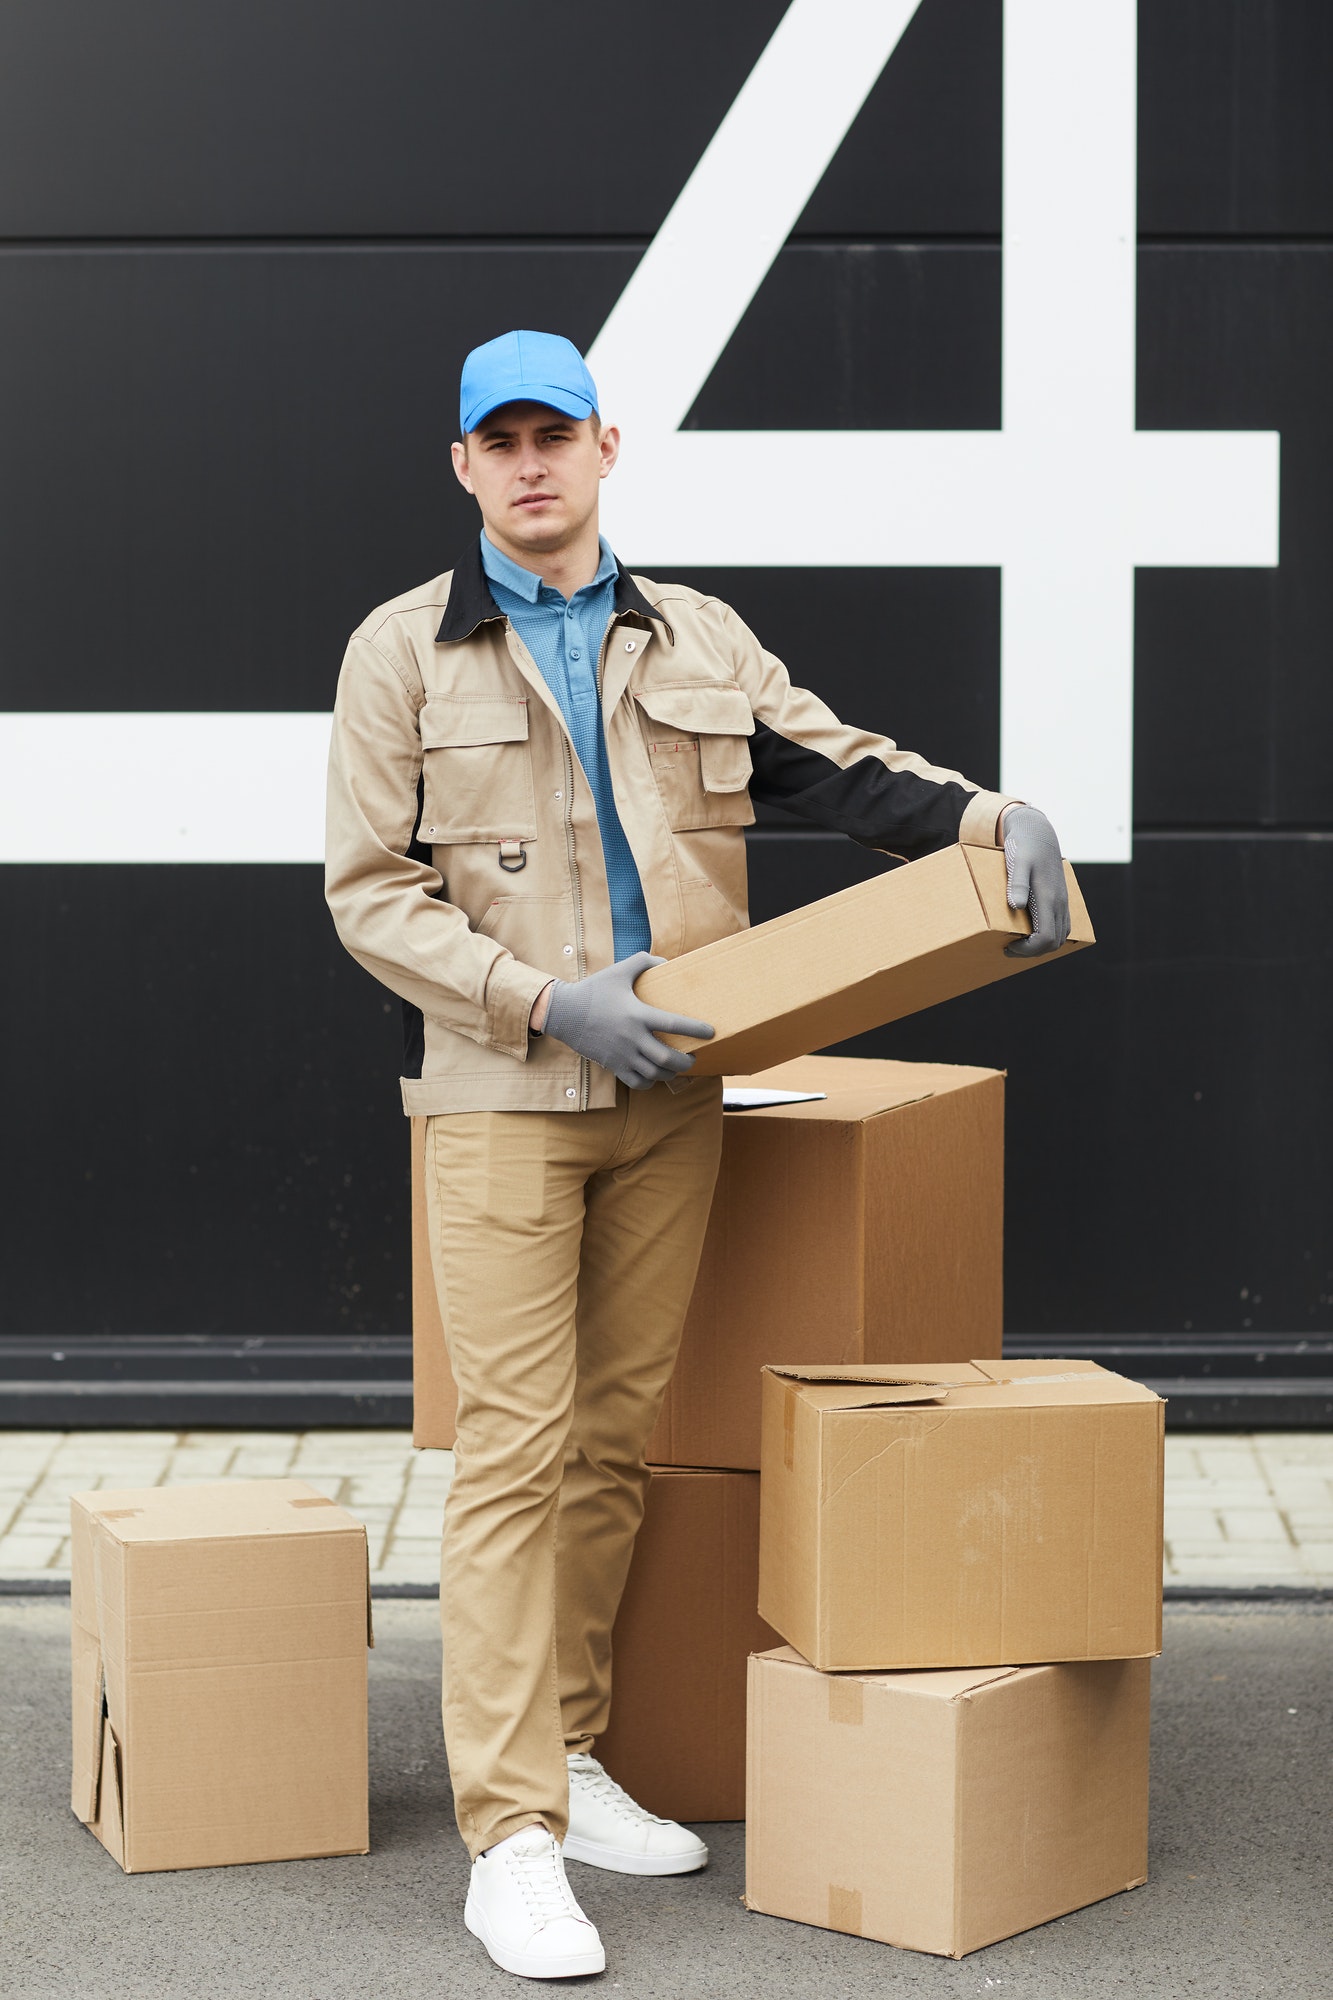 courier-working-with-parcels-in-warehouse.jpg